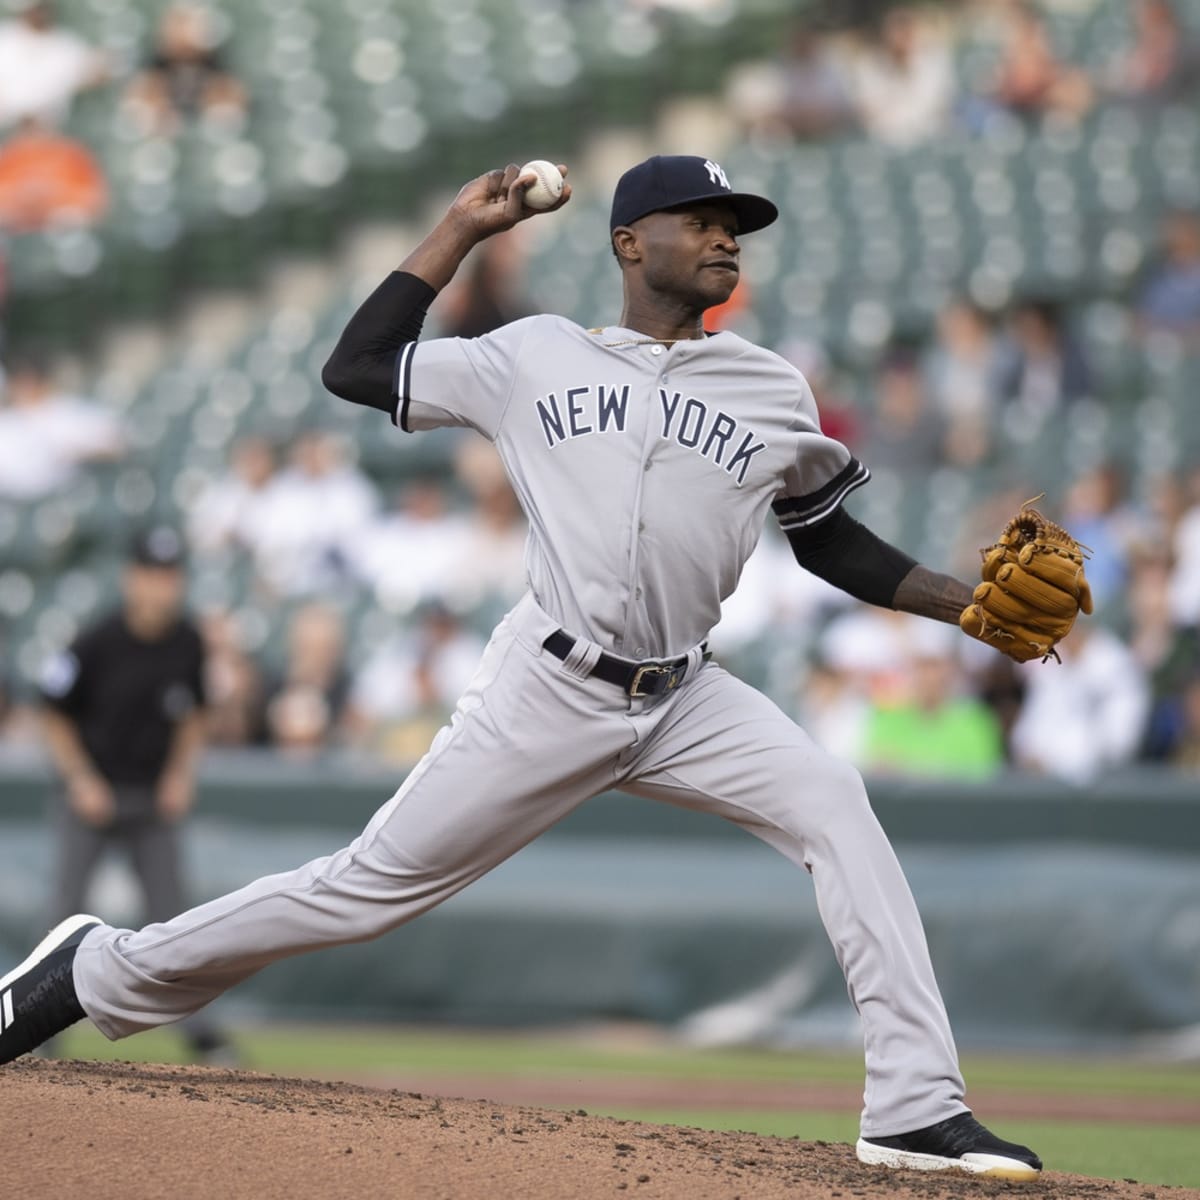 Domingo Germán of Yankees Proves Perfection Can Come at Any Time